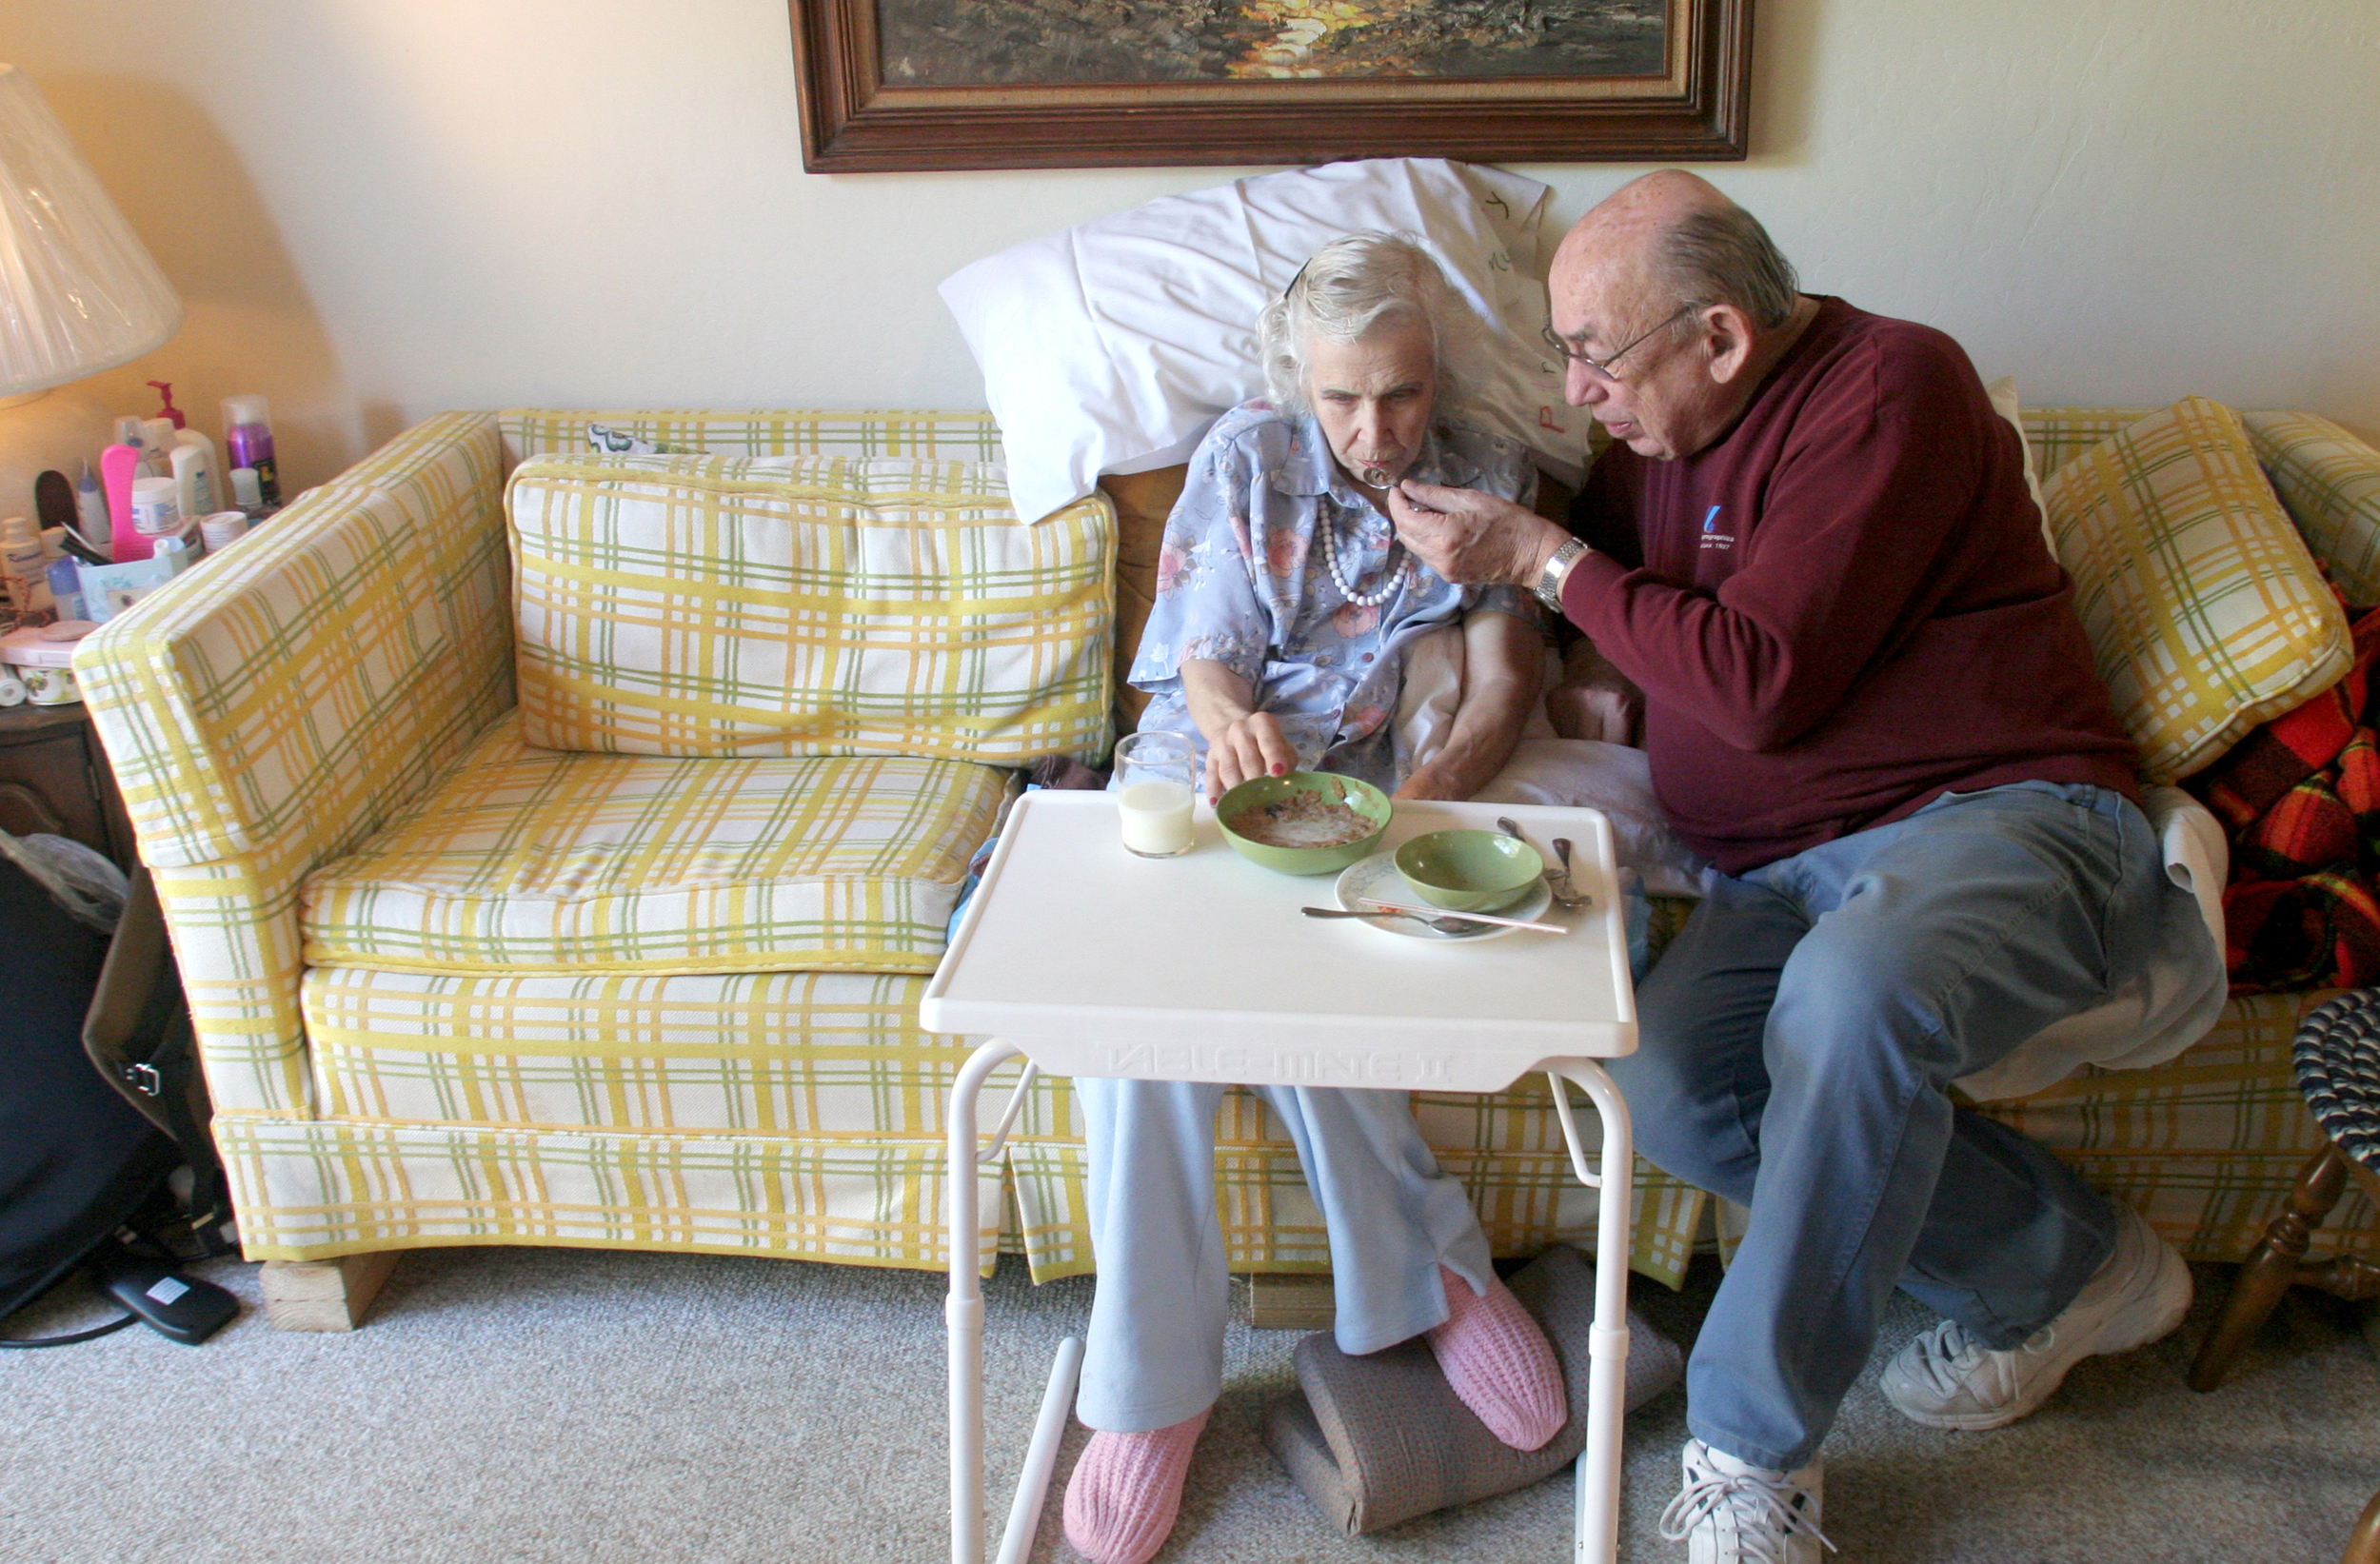  The husband of a hospice patient feeds her at home every day; he has taken to caring for her at home with the help of Hospice of the Valley and will so until she passes how she wished at home how they planned.&nbsp; 